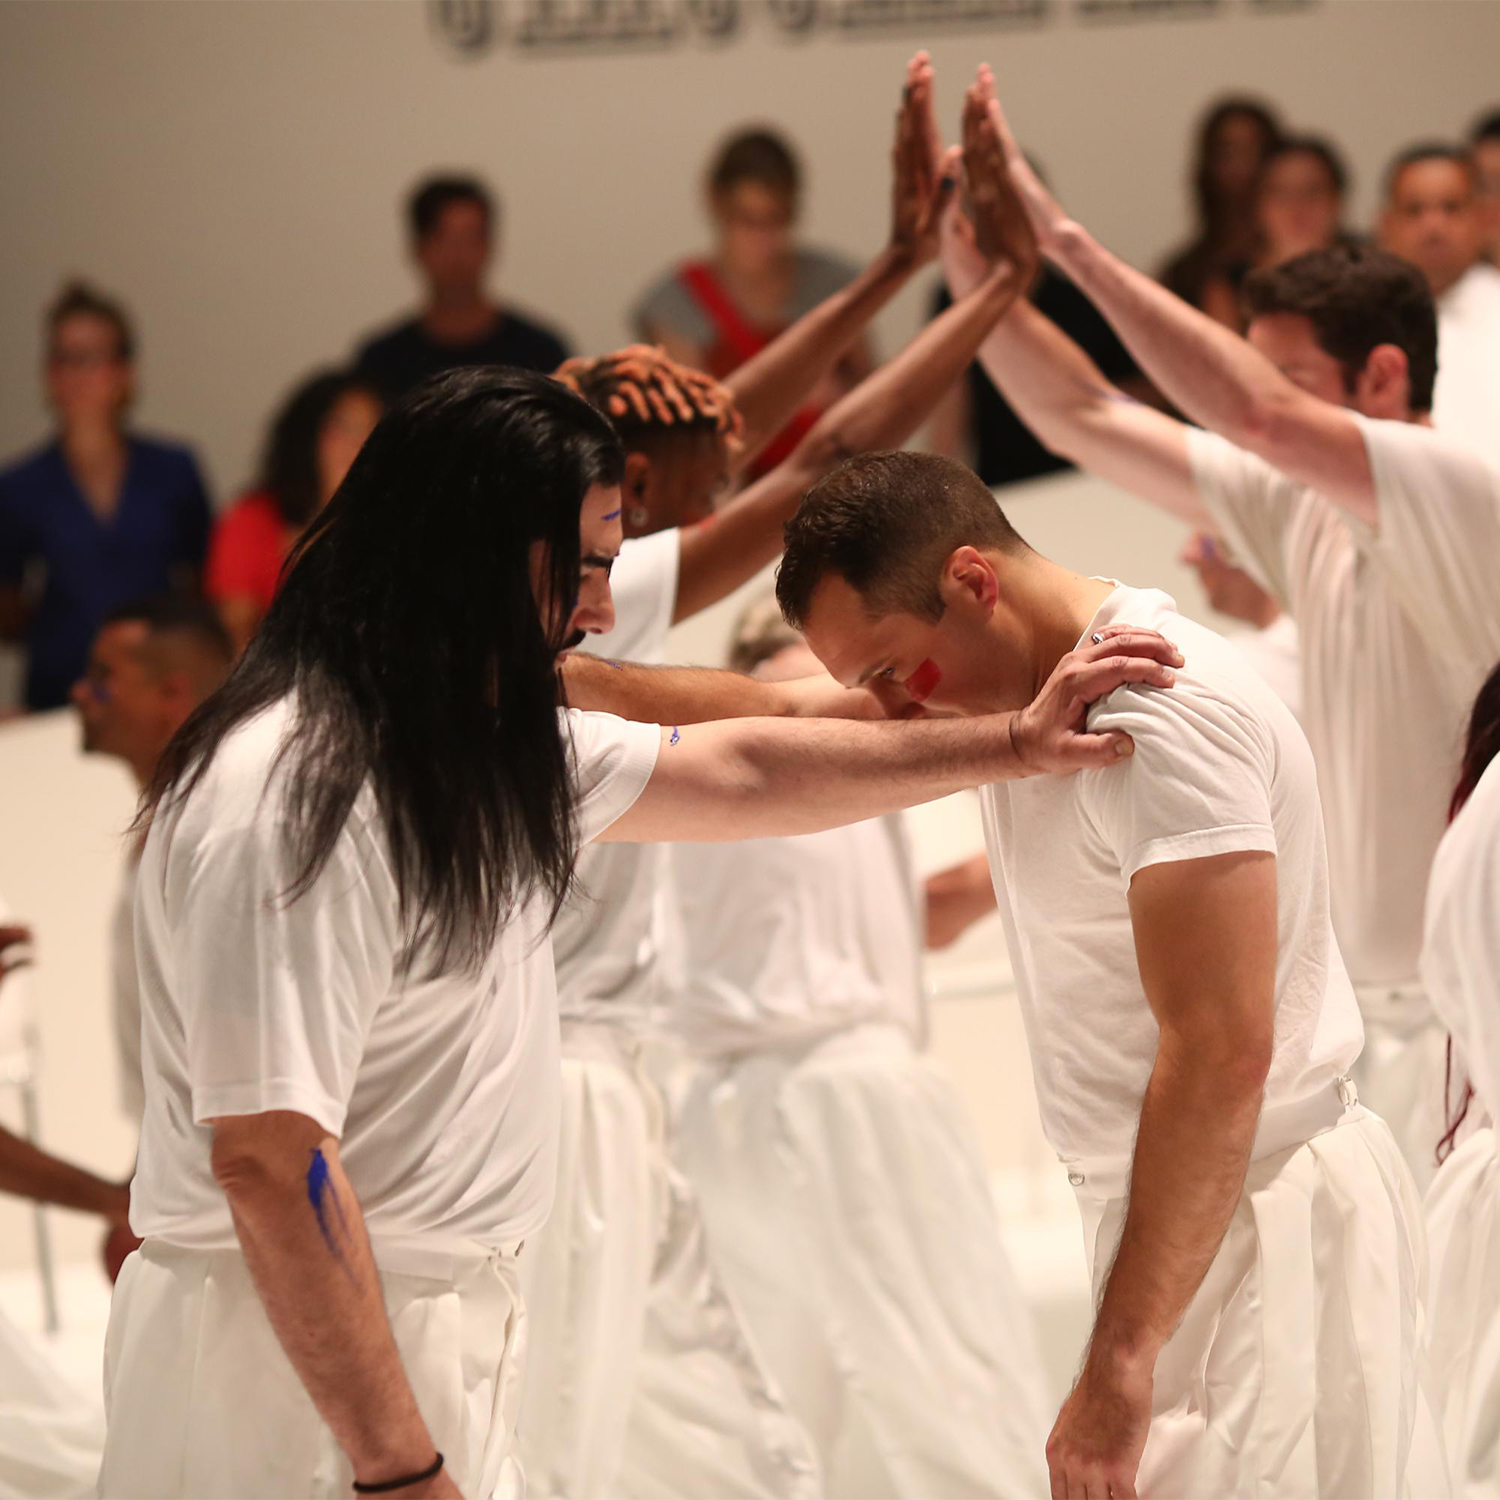 Primitive Games - performance, 1 hr. at Guggenheim Museum, New York, NY, 6/21/18.Photo by Paula Court